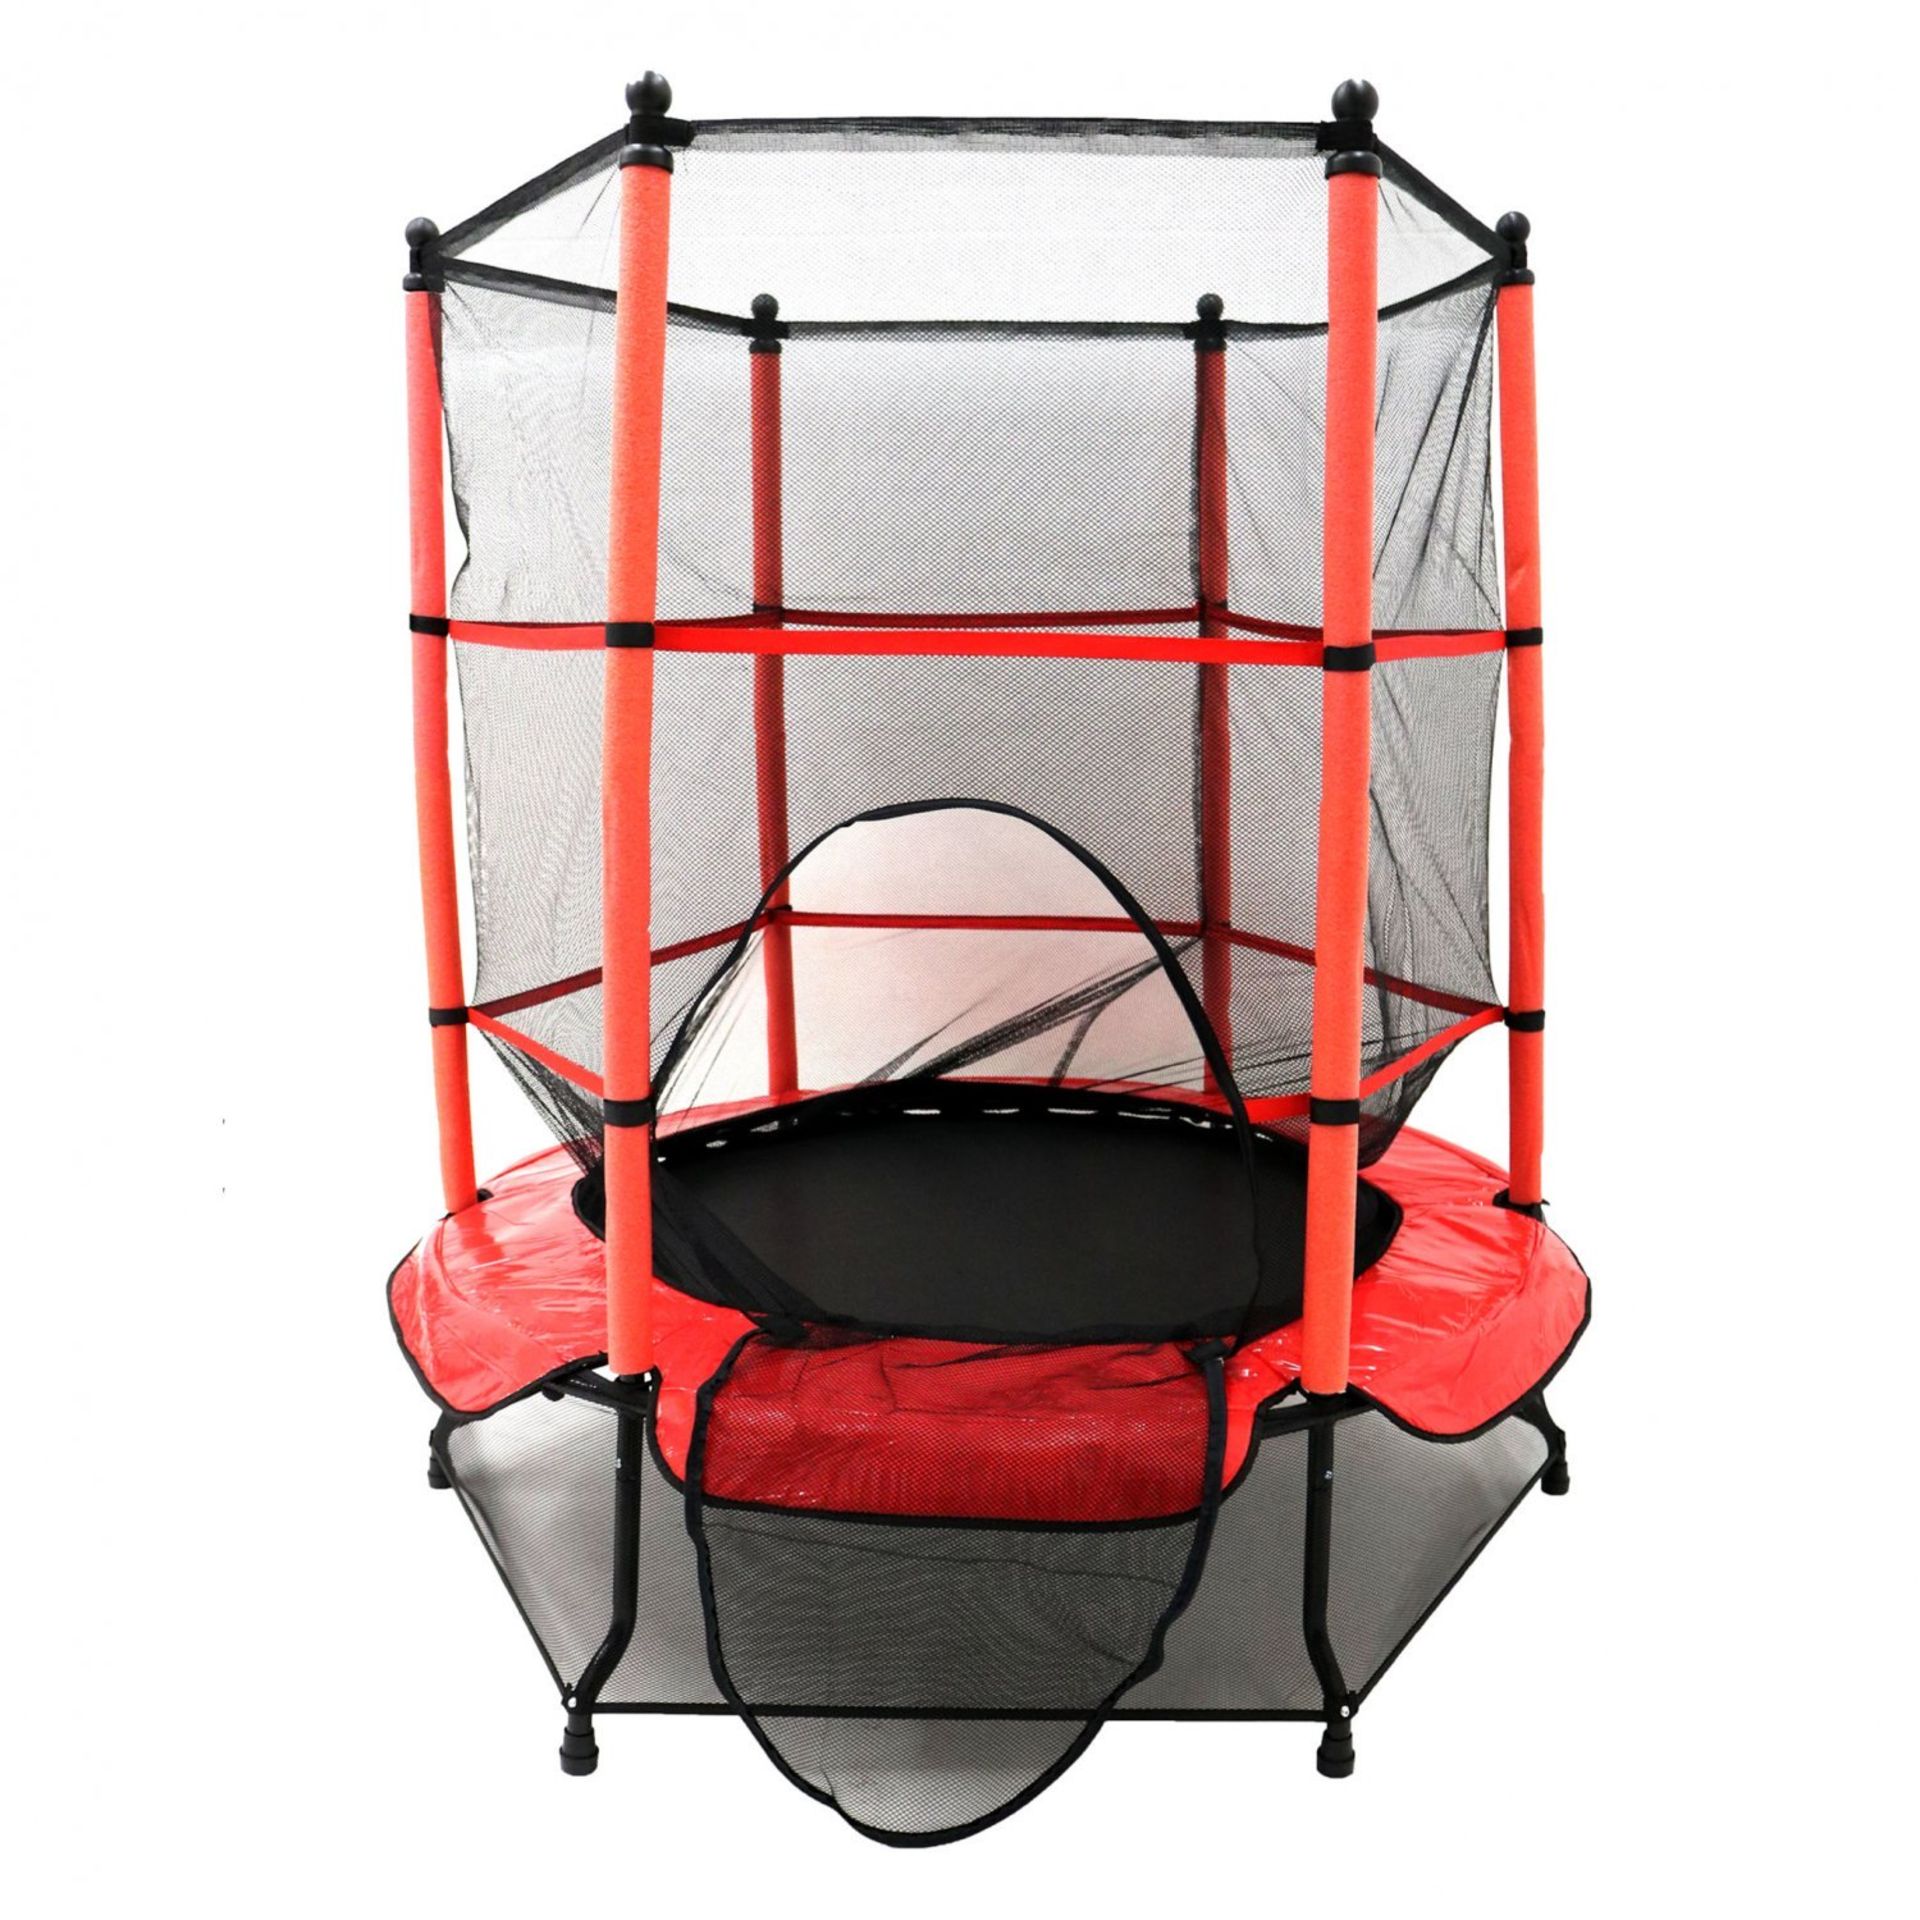 (RU95) 55" Kids Trampoline with Safety Net and Red Spring Cover Garden Outdoors This trampol... - Image 2 of 2